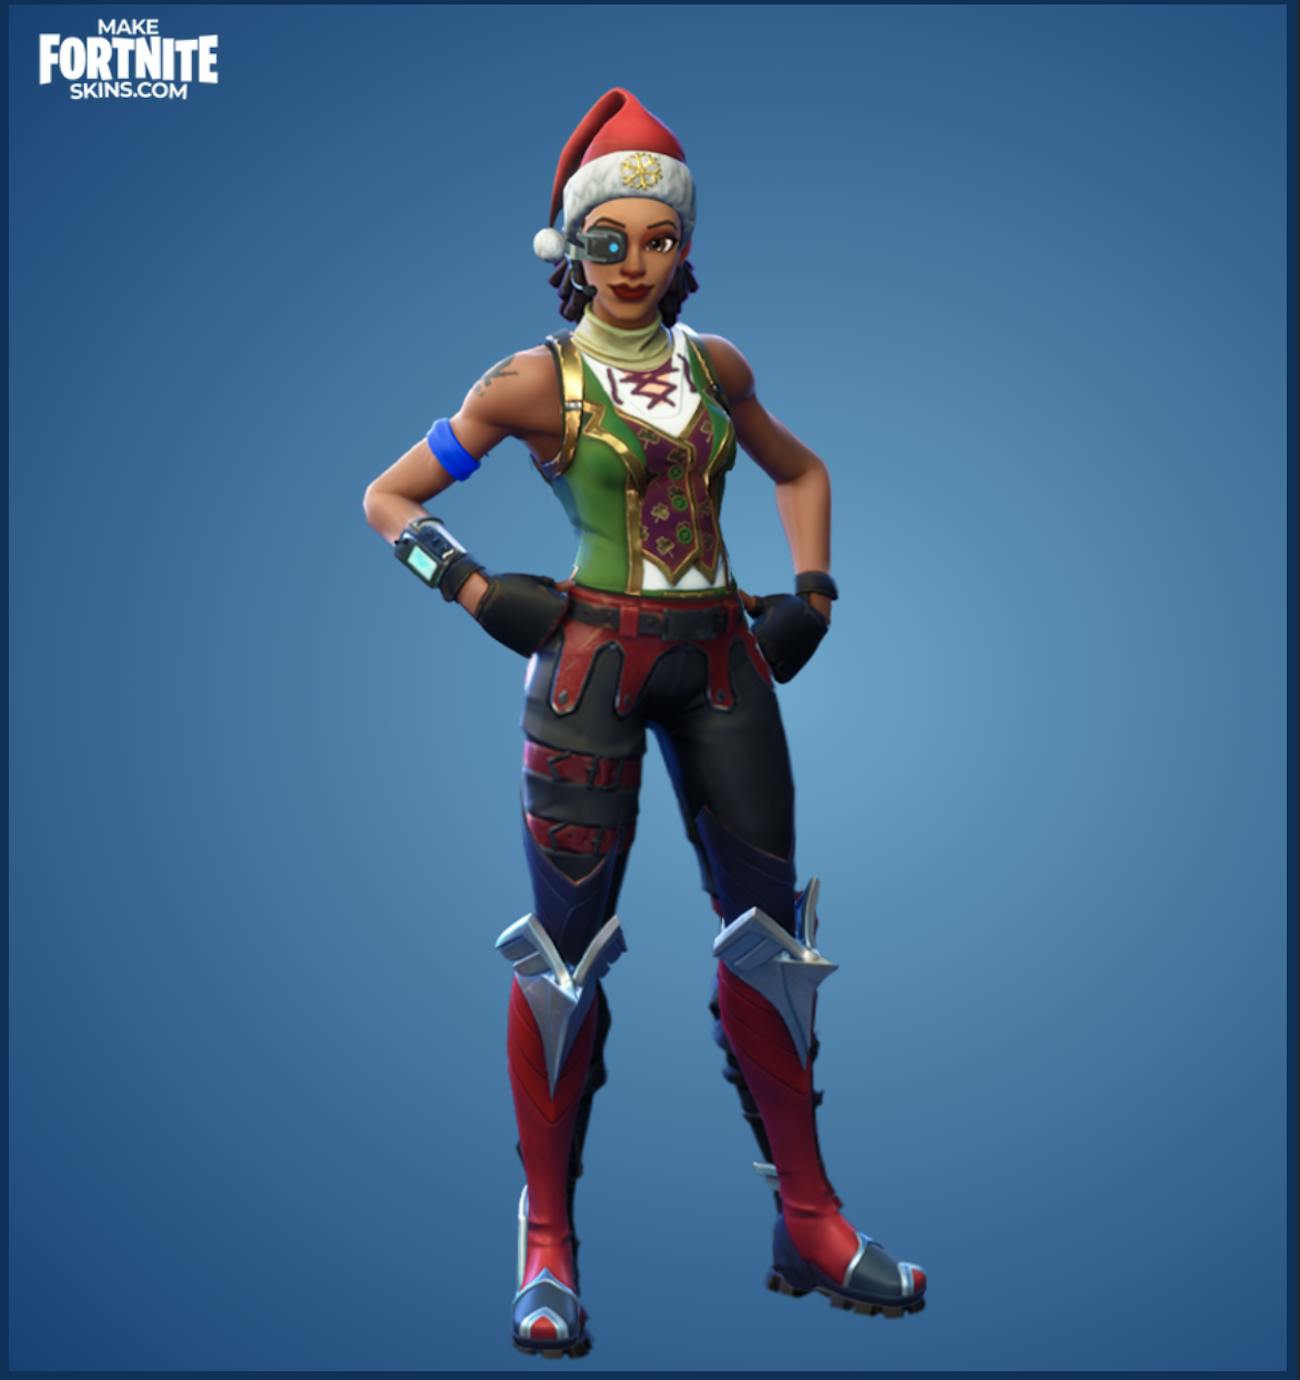 Fortnite Skin Creator How To Make Your Own For Fun Inverse - merry christmas ya filthy animal